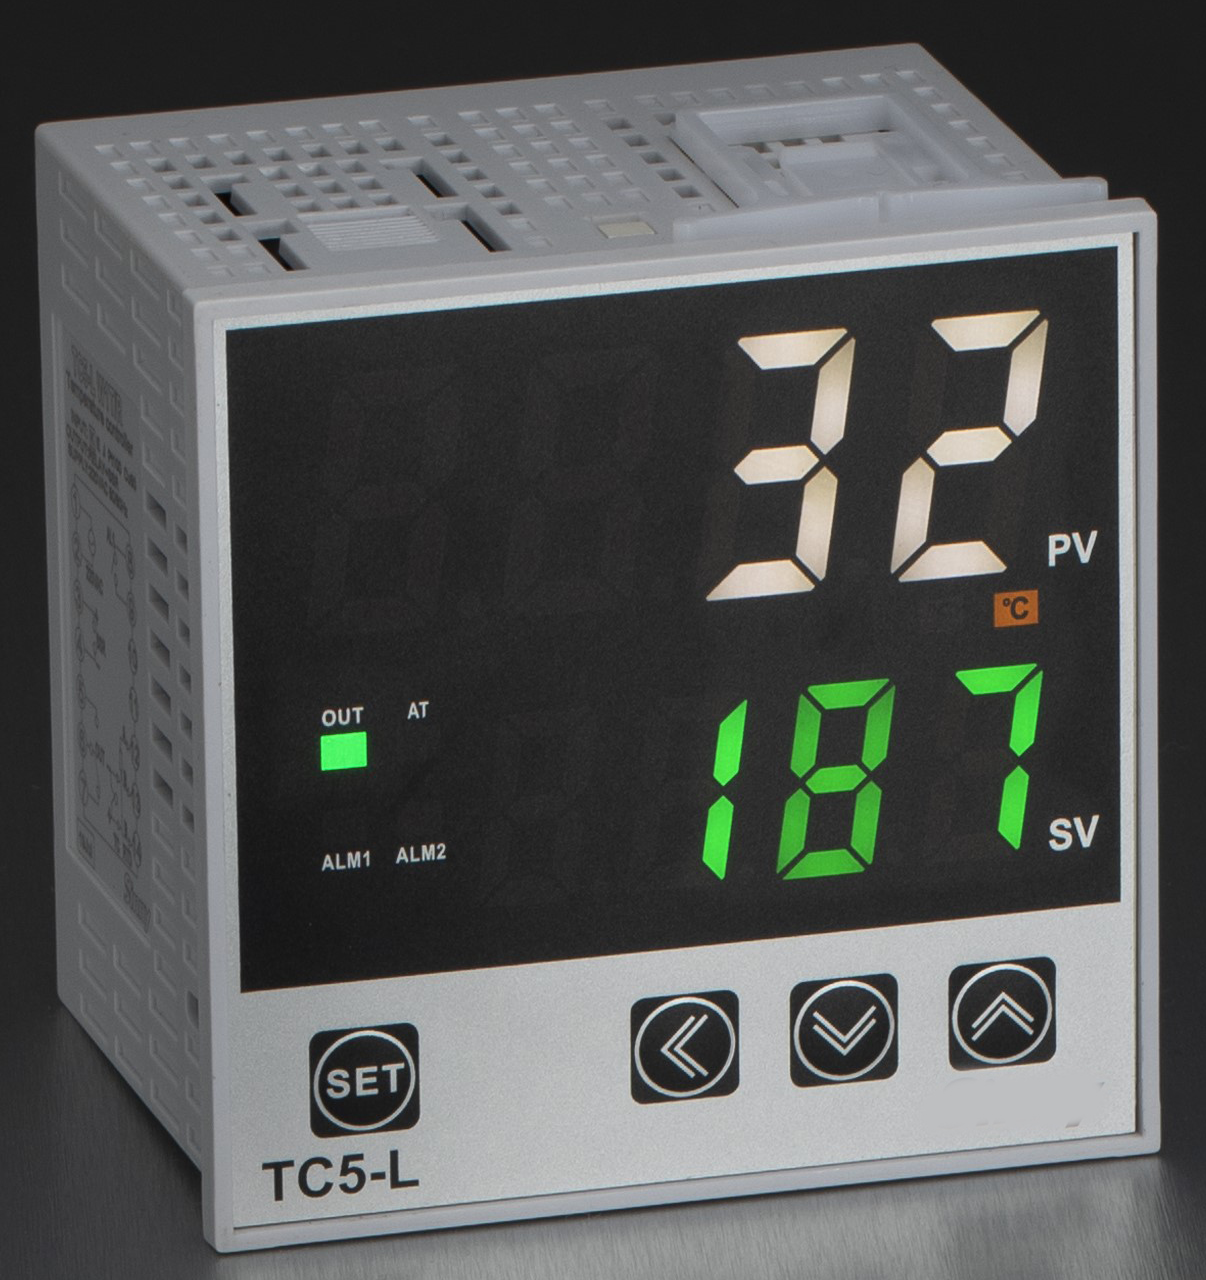 FC5-M-1A-2-G-4 PID Controller, 24VDC with 2 x Relay Alarms, E,J,N,T,S,R,B Thermocouple, Linear Current/Voltage and  PT100/Cu20 RTD Input, 72x72mm,4-20mA Output